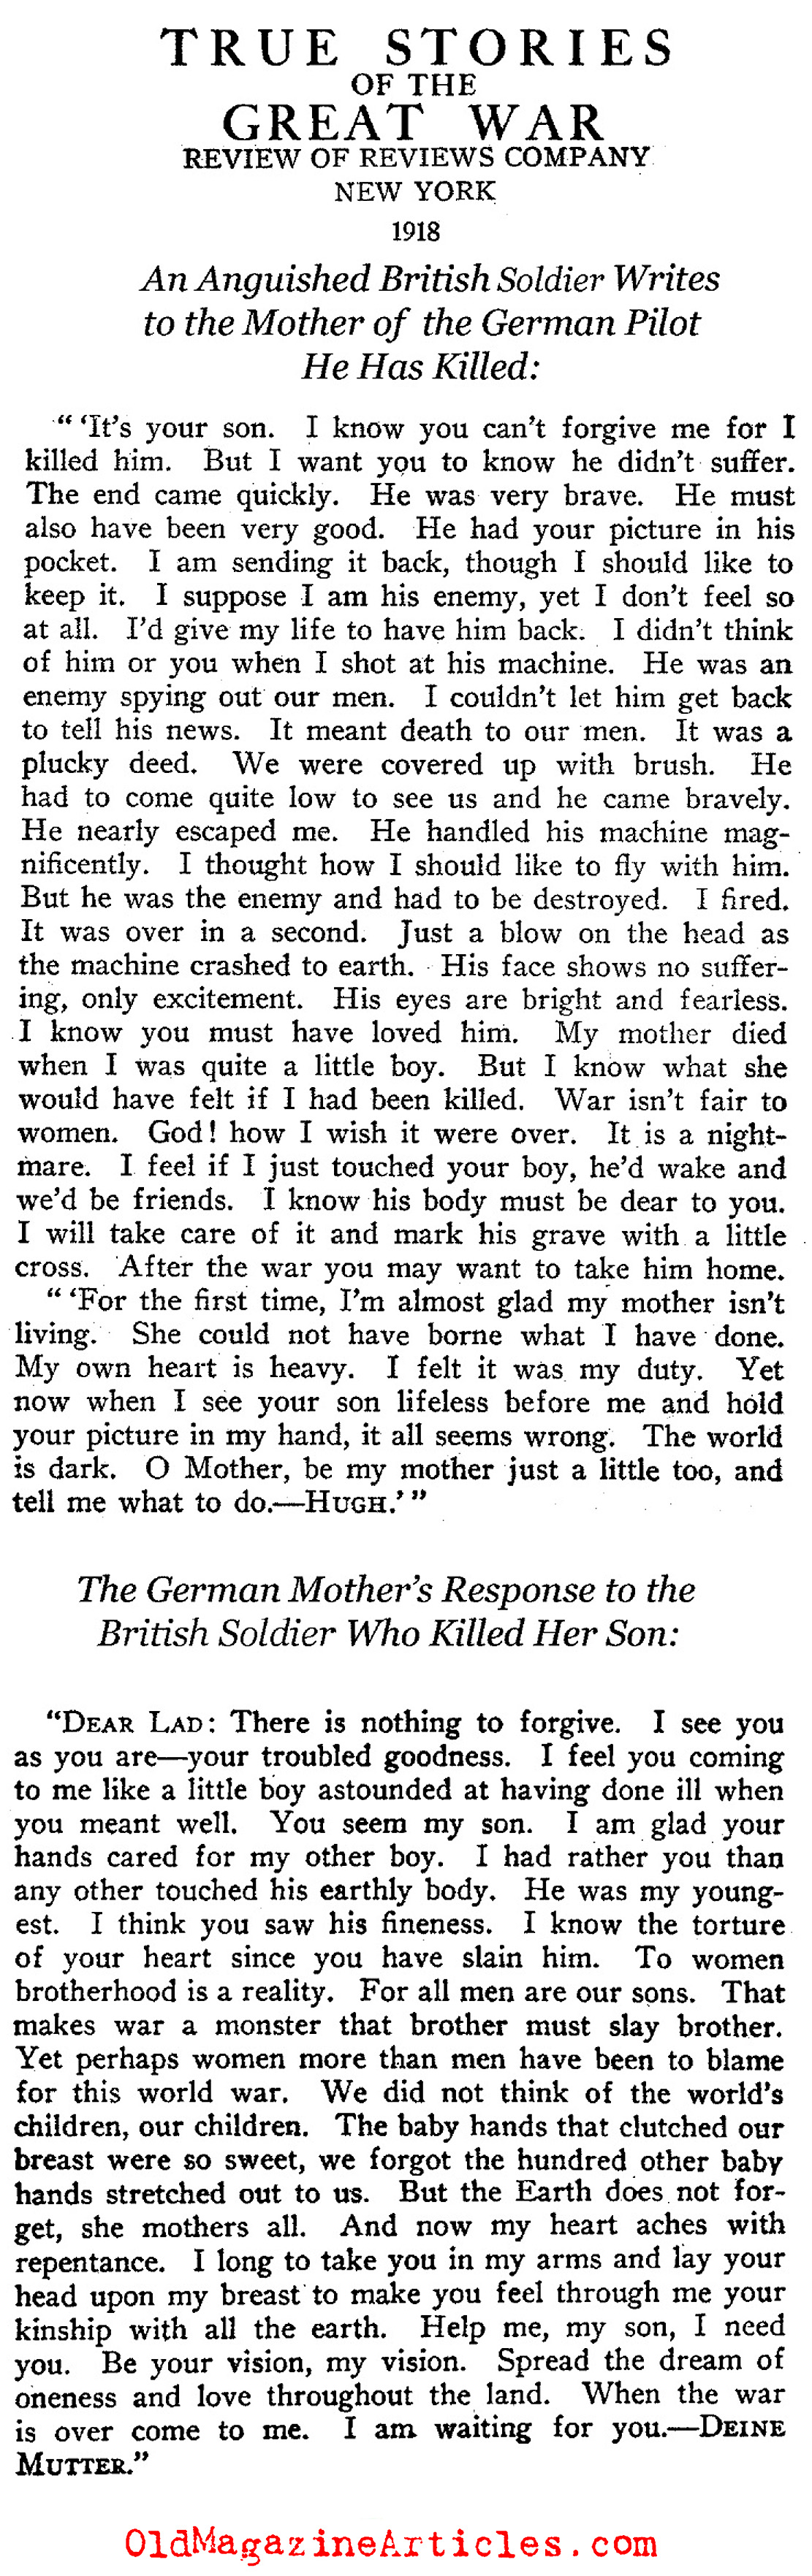 A British Tommy to the Mother of his Victim (True Stories of the Great War, 1918)